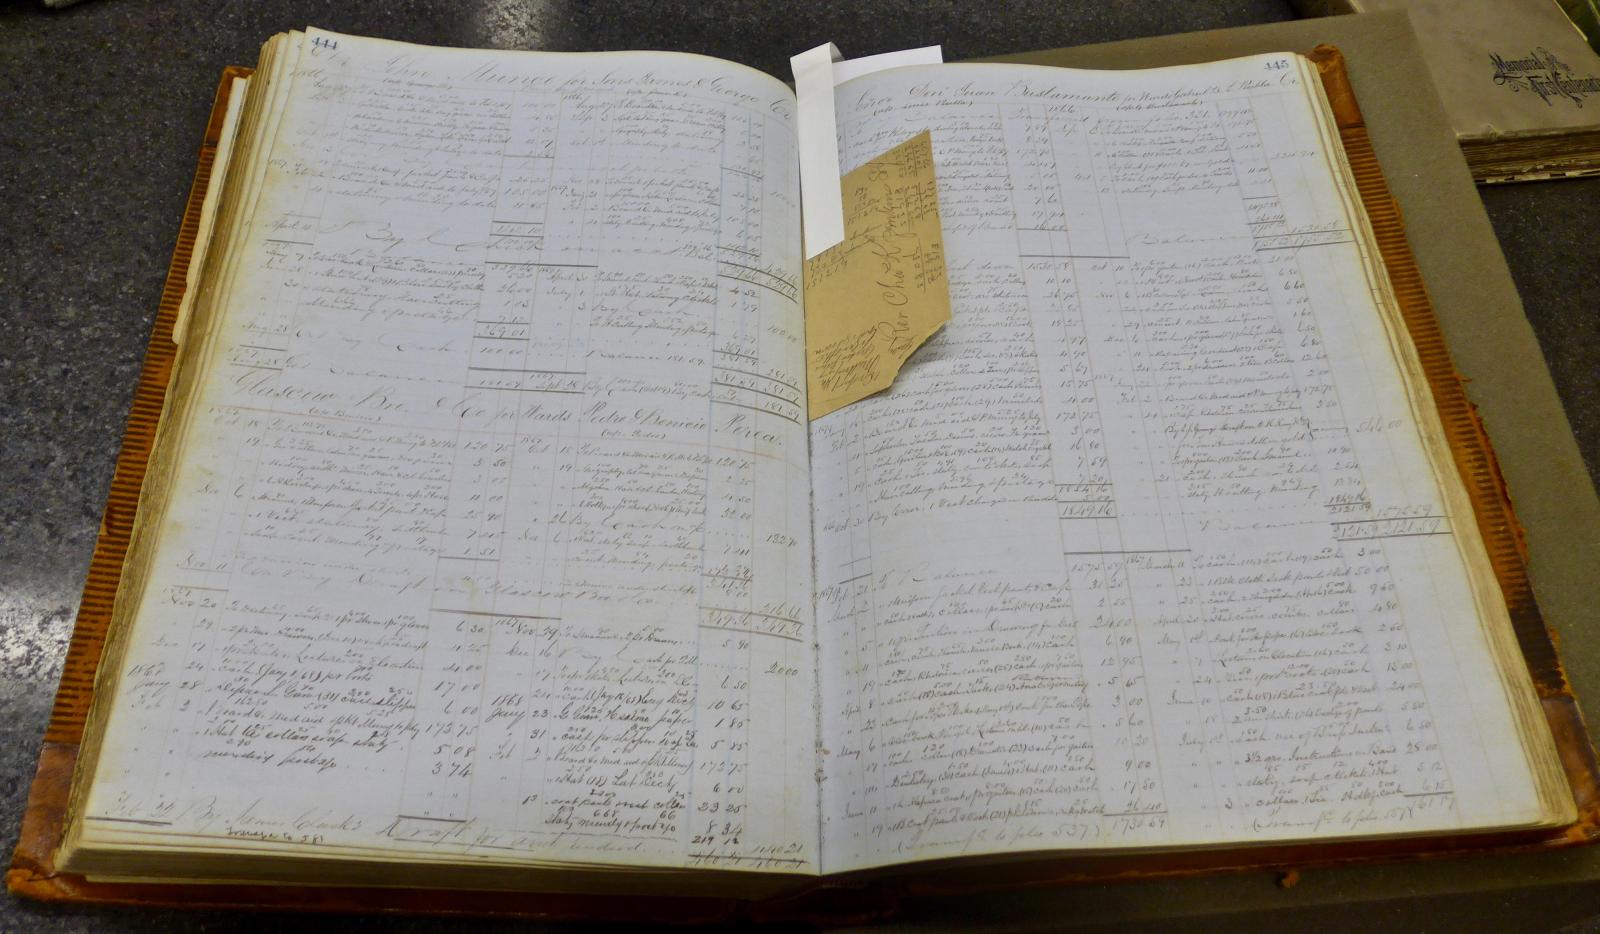 An open log book with writing on the pages